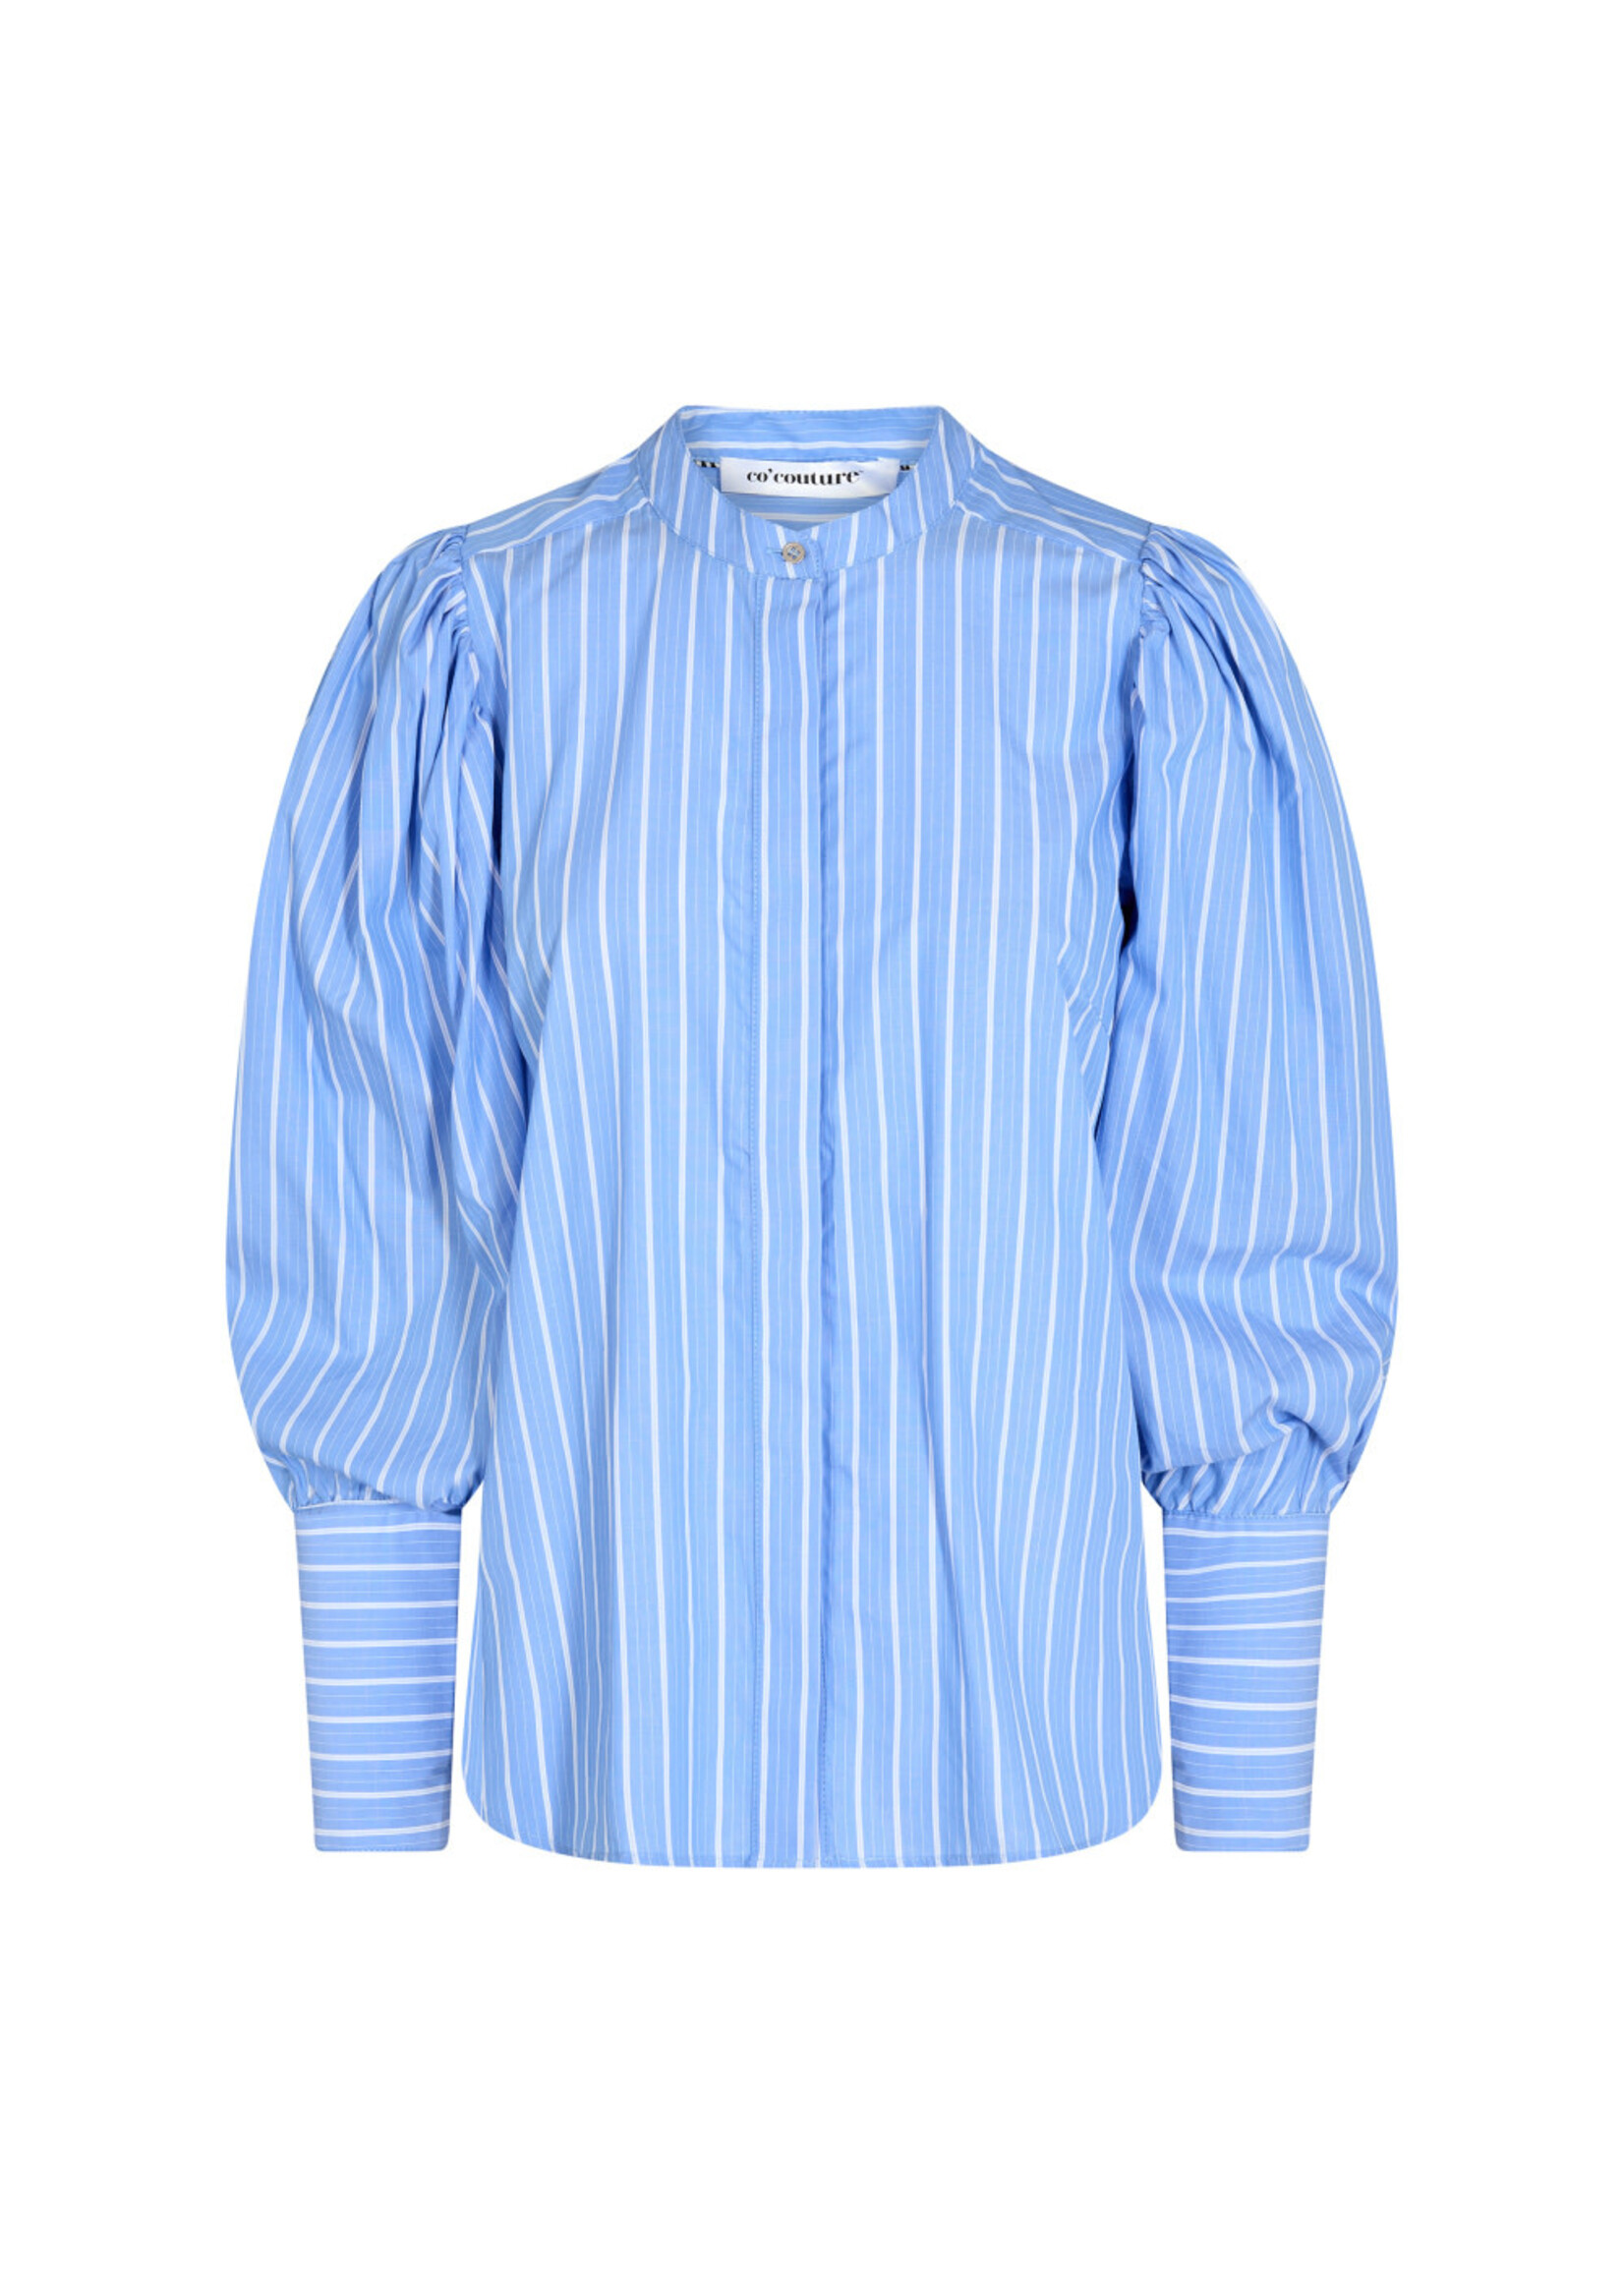 Co Couture Co Couture, MalouCC Stripe Shirt, New Blue